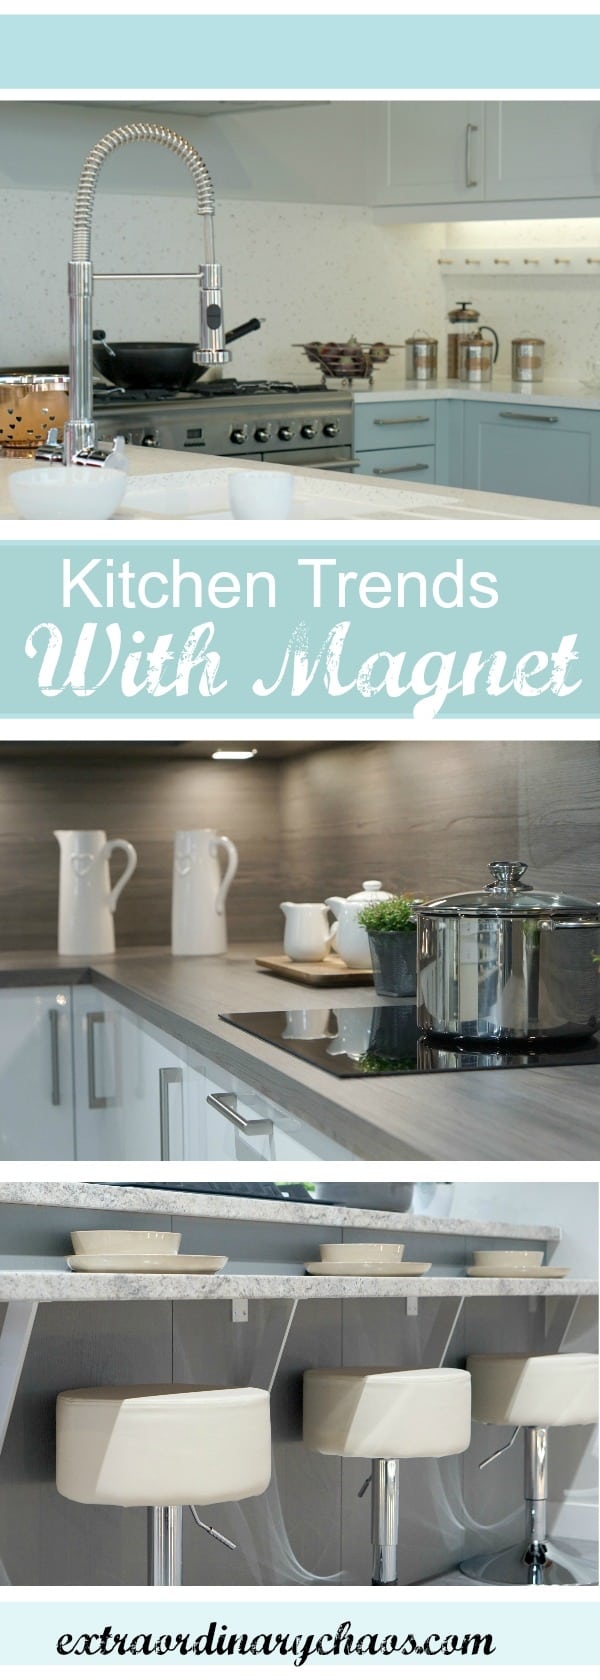 Thinking of a new kitchen or adding a kitchen Island, creating better storage. Then check out the Latest Kitchen Trends and Storage Solutions With Magnet.